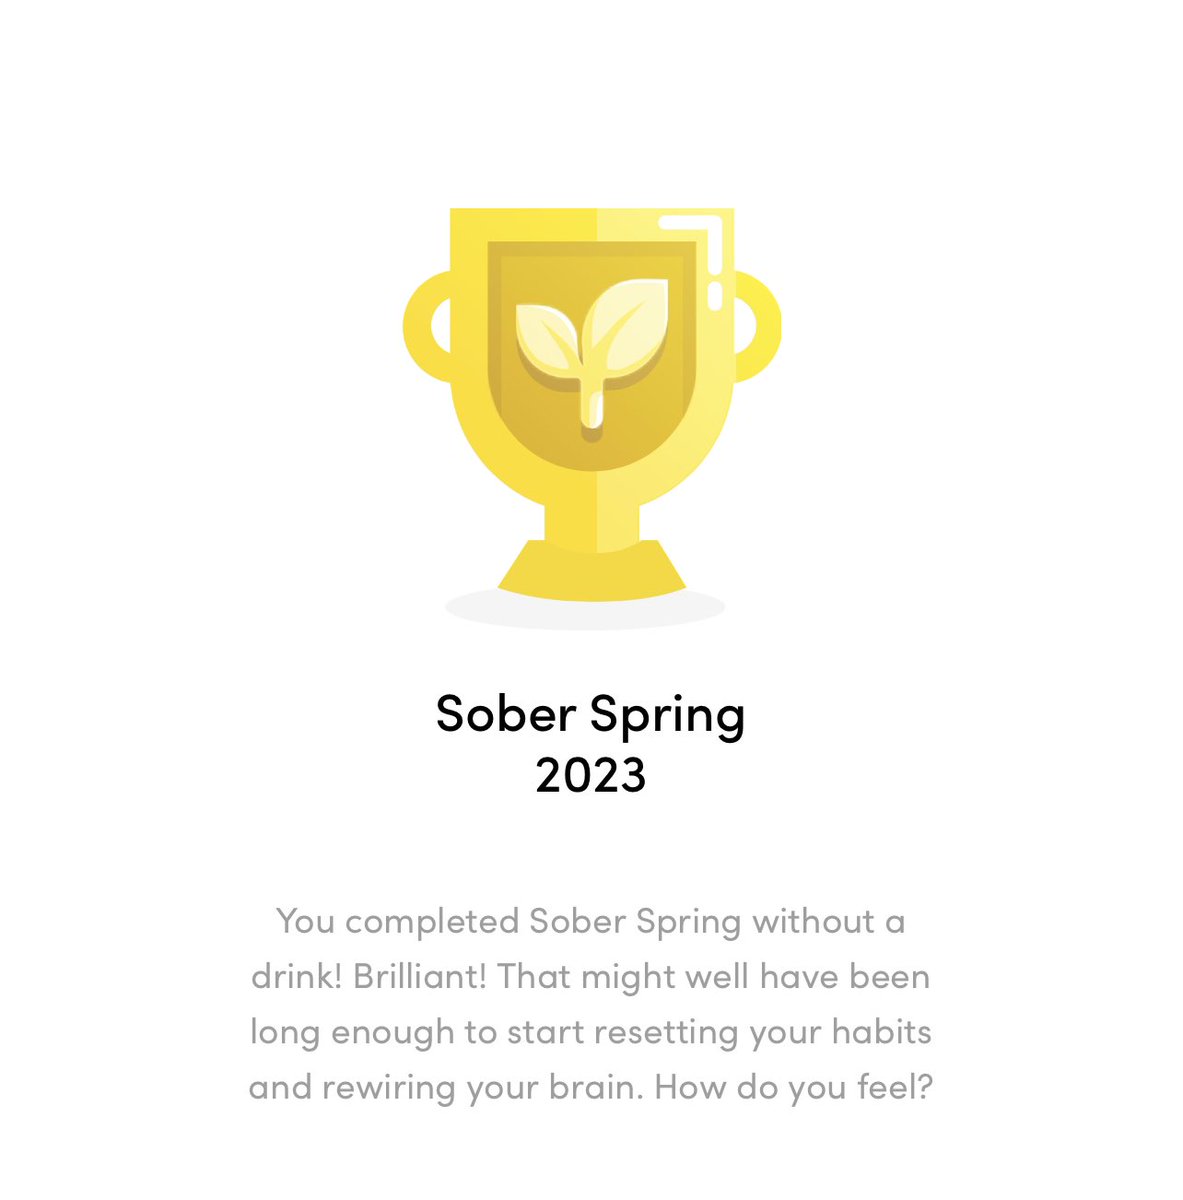 #SoberSpring completed! 172 days without an alcoholic drink … @dryjanuary turned into #Dry2023 and currently no definite plans to start drinking again on 1 Jan 24.

Thanks for the #TryDry app which has been very helpful on the journey.